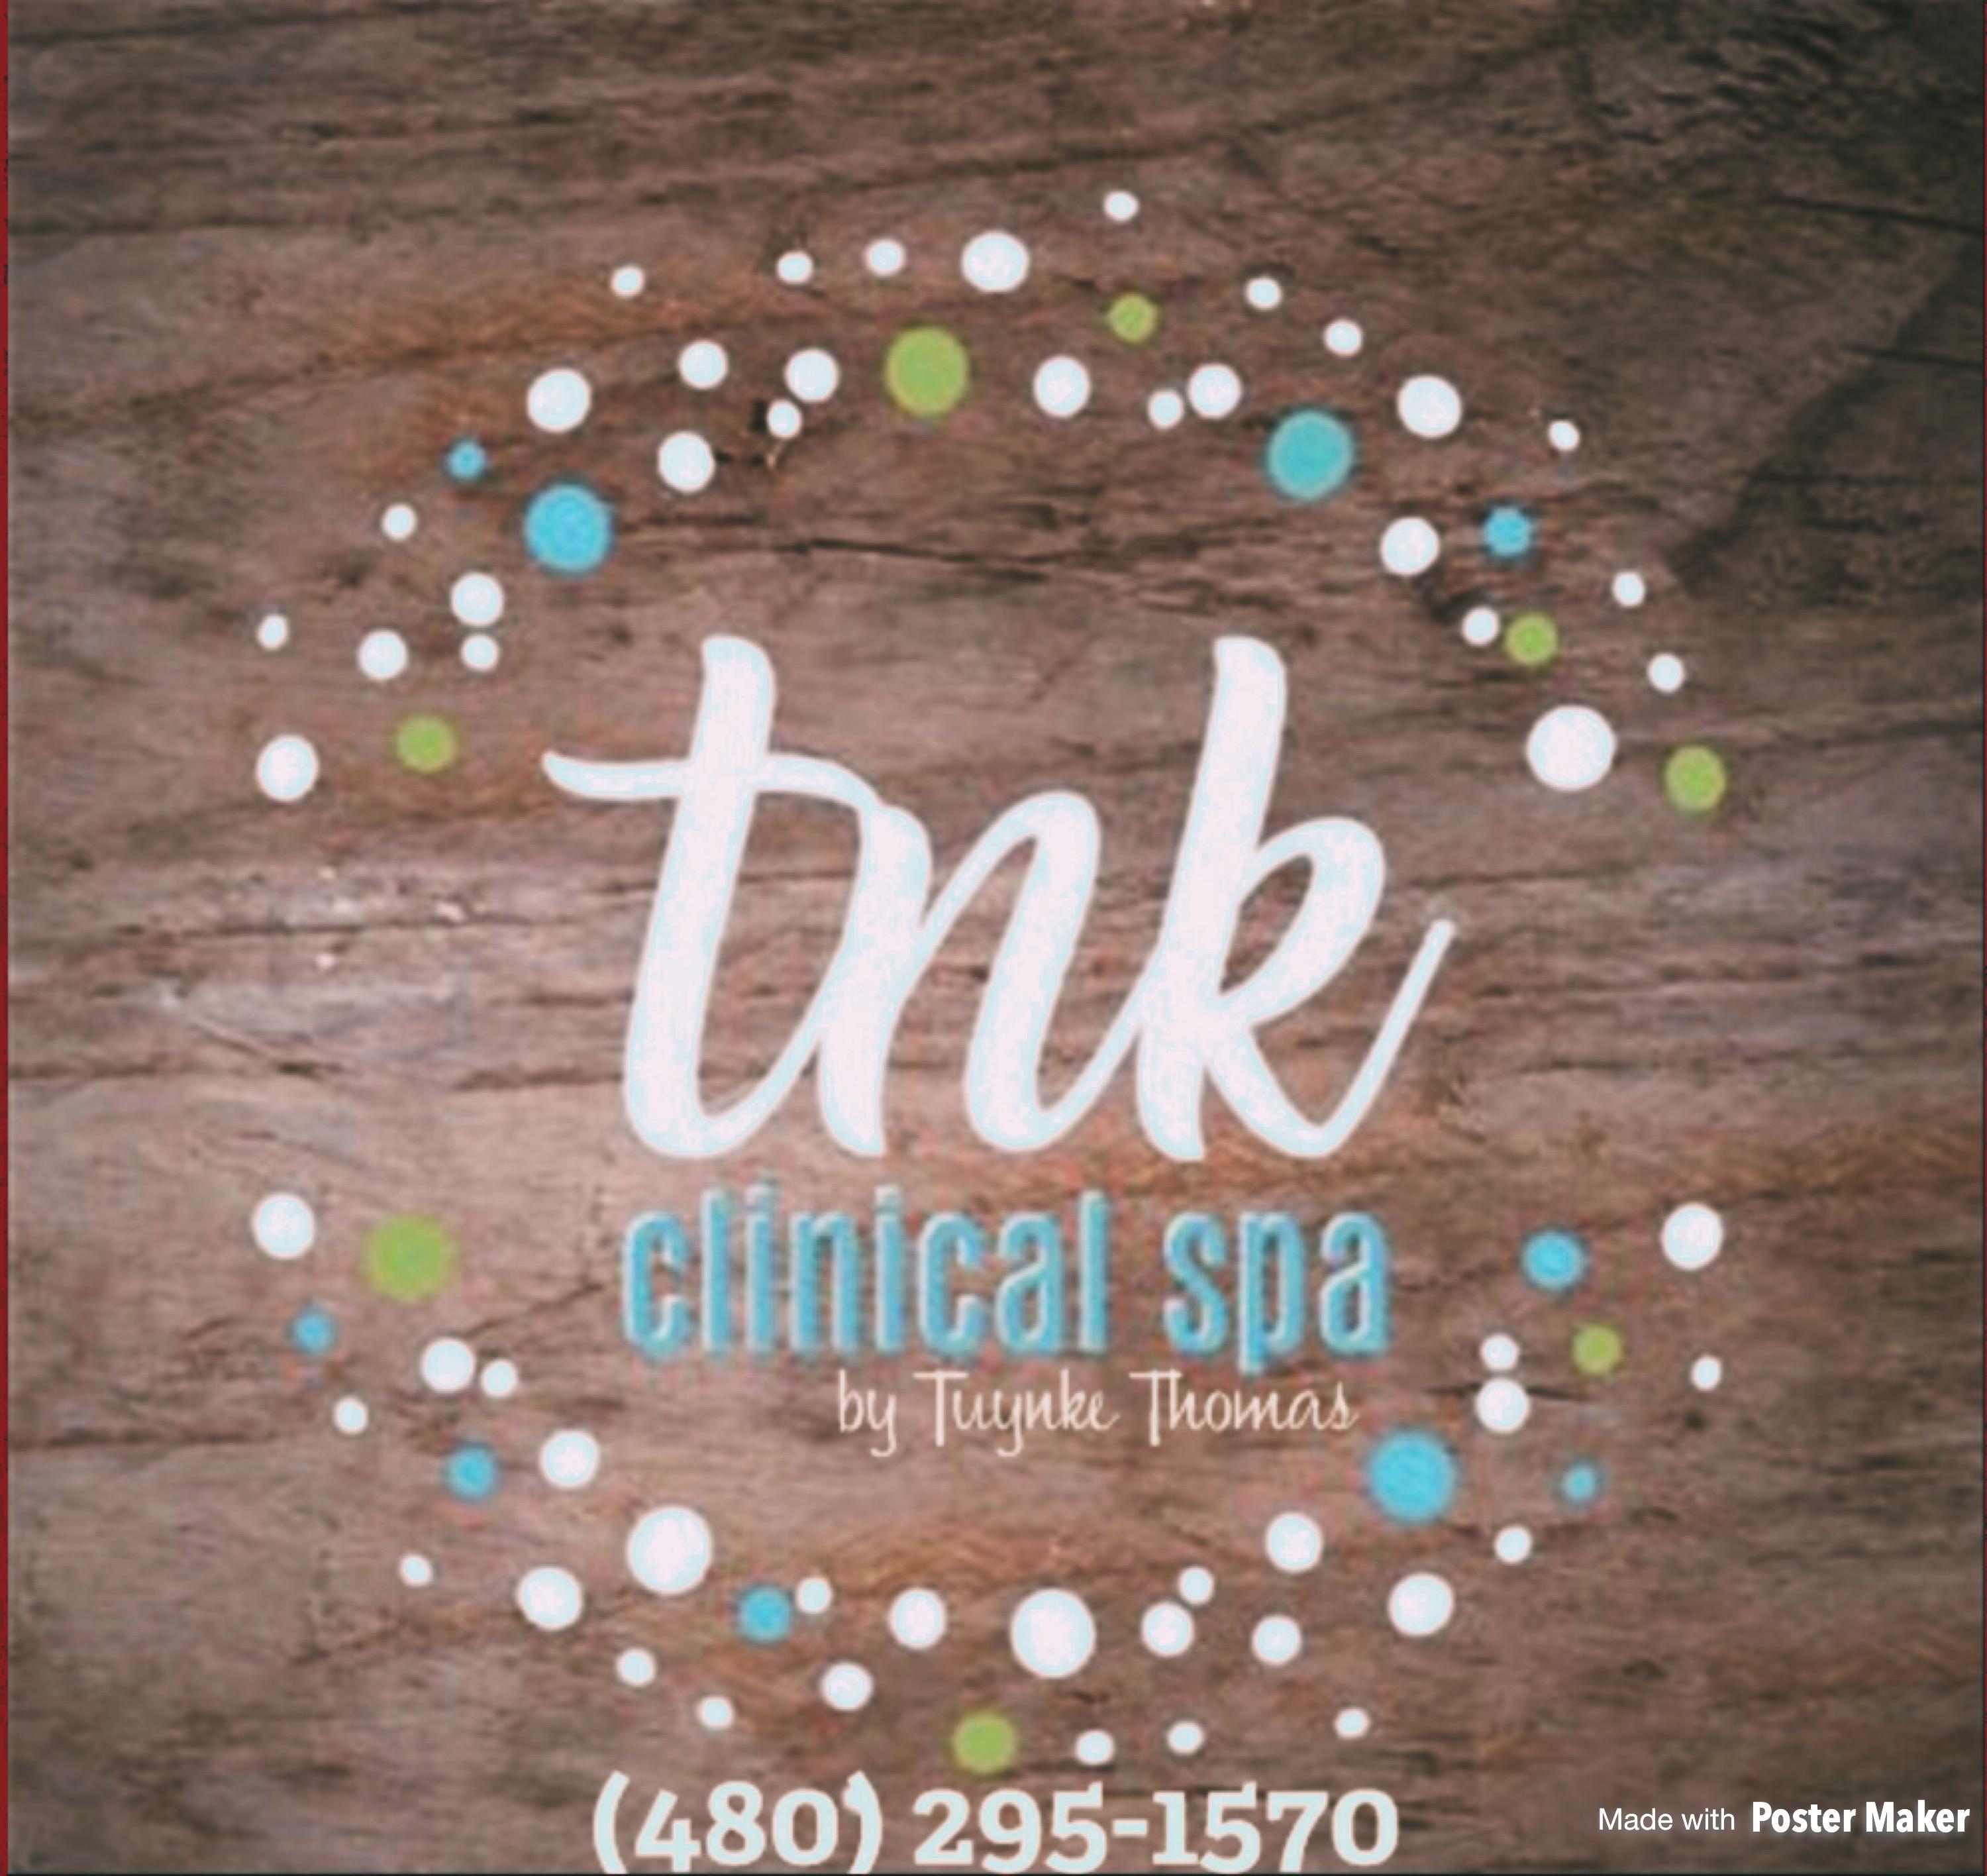 TNK Clinical Spa